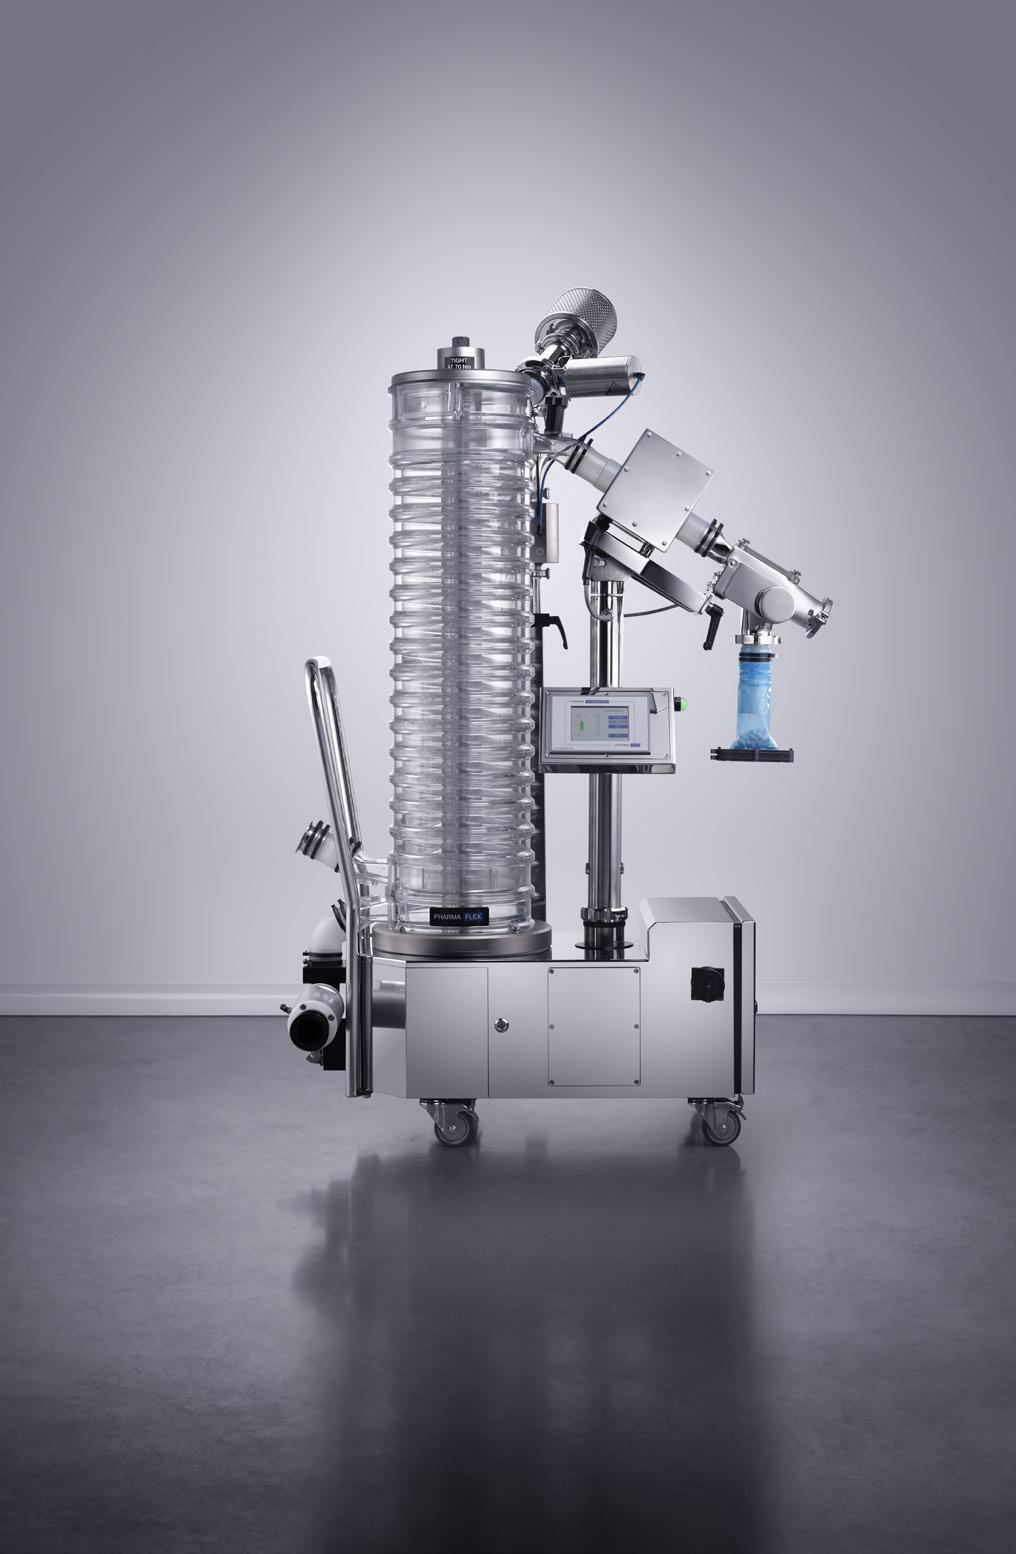 The iseries frame is a new generation of modular frame that allows to run a Pharma Technology and Pharma Flex deduster on the same vibrating base thanks